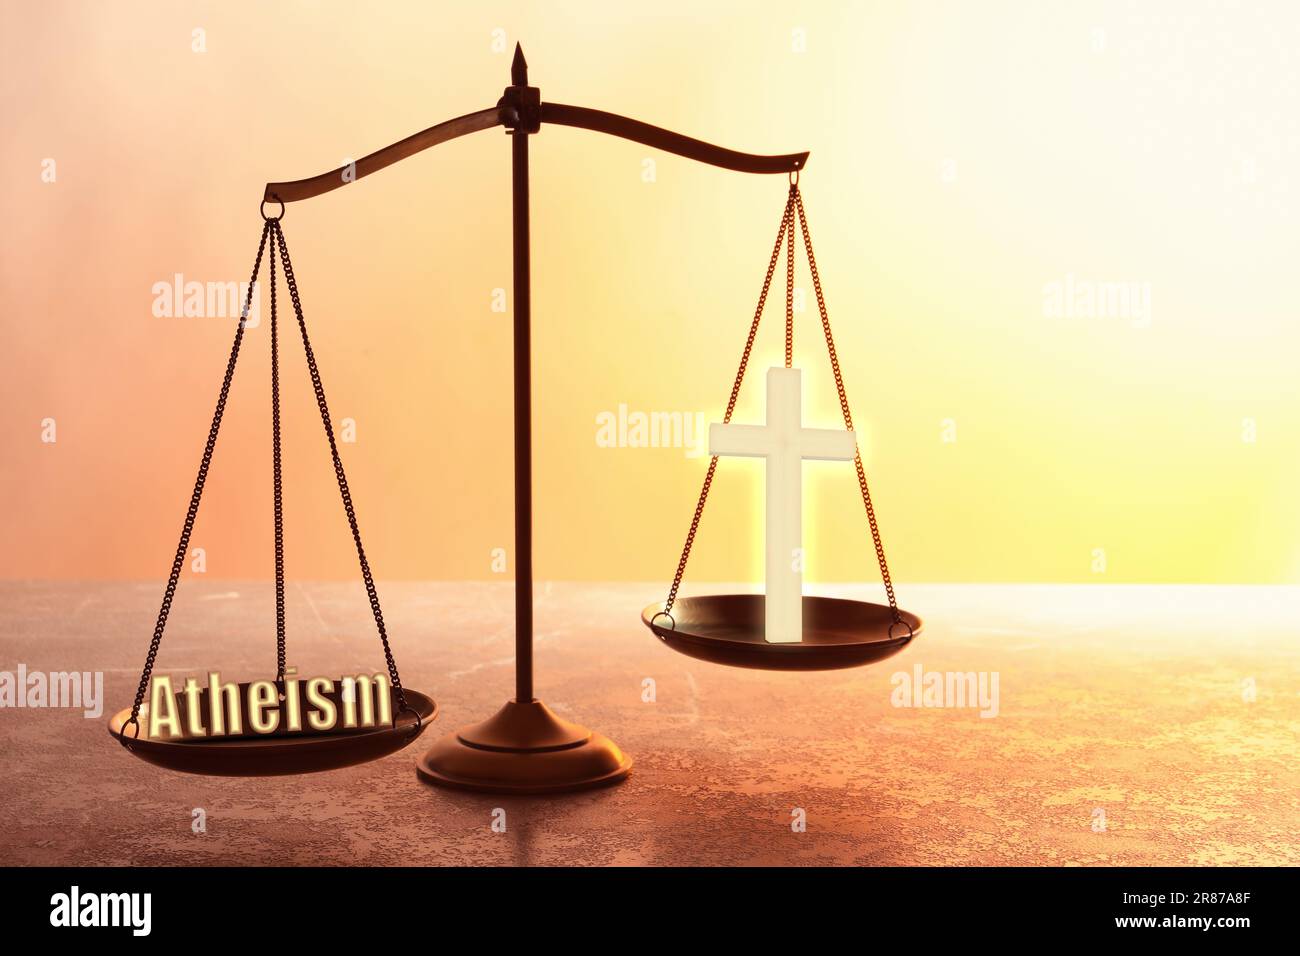 Choice between atheism and religion. Scales with word and cross on textured surface Stock Photo